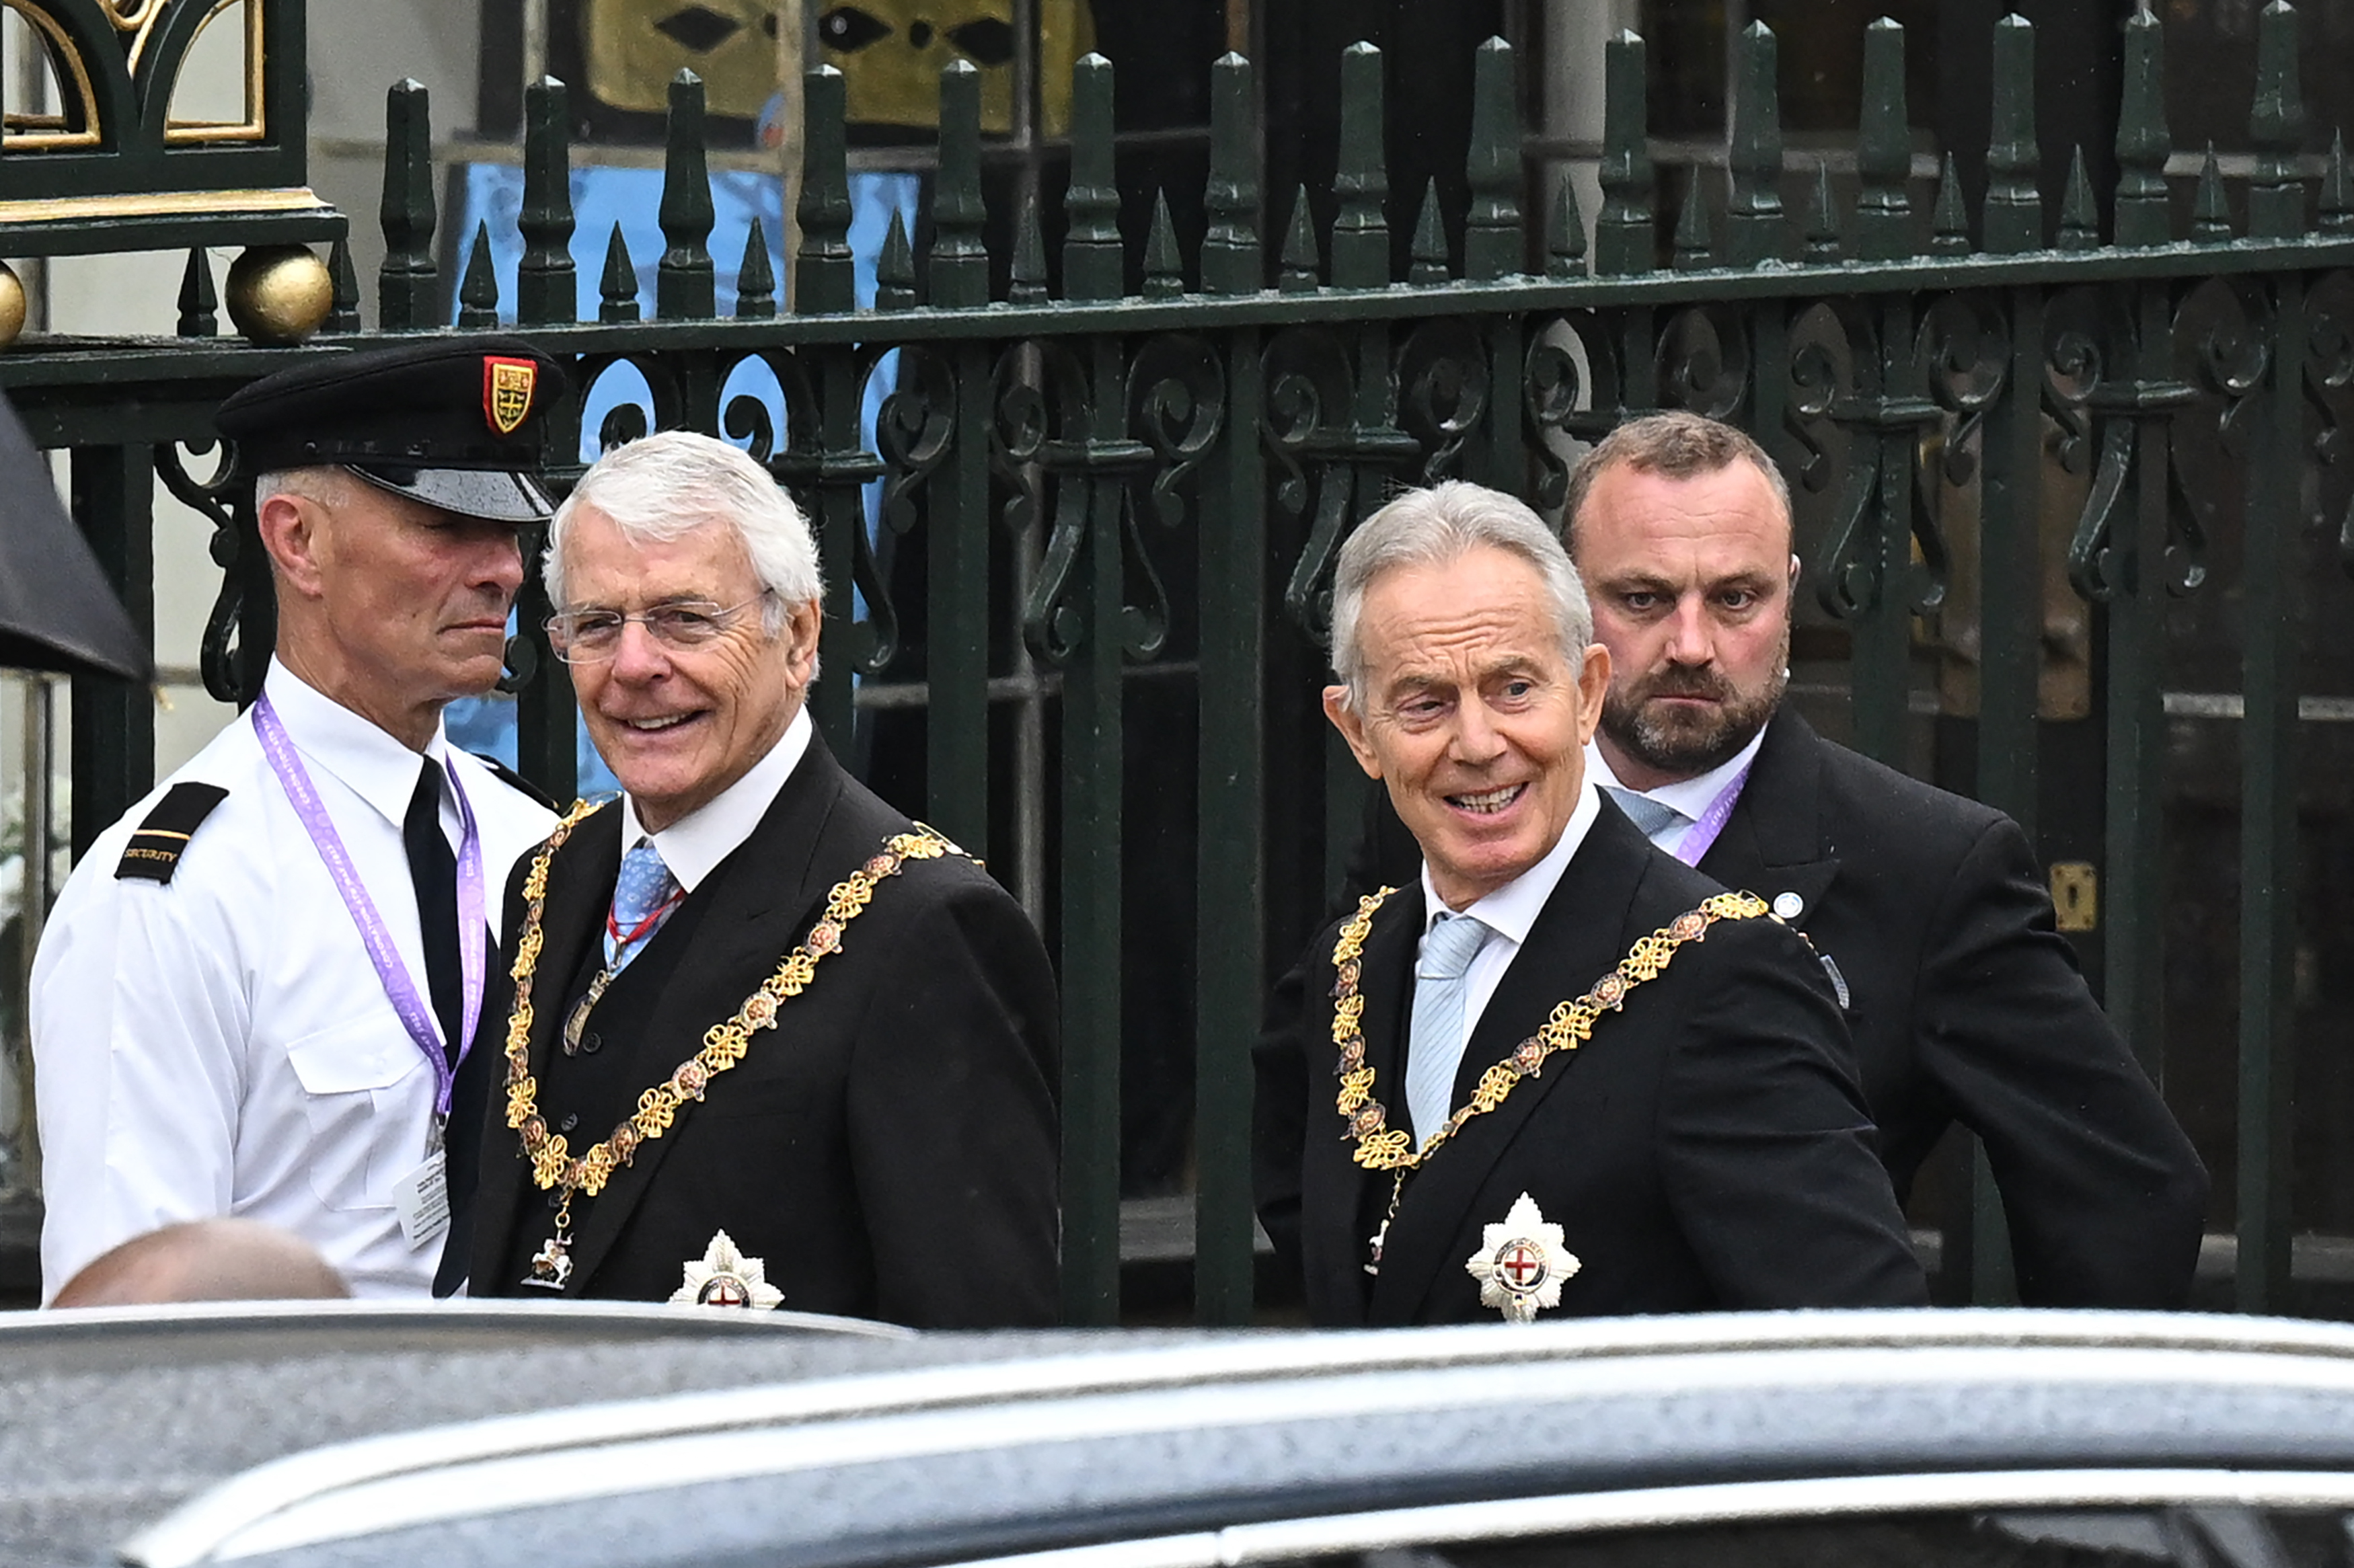 Former UK Prime Ministers John Major, left, and Tony Blair arrive at Westminster Abbey in London on Saturday, 